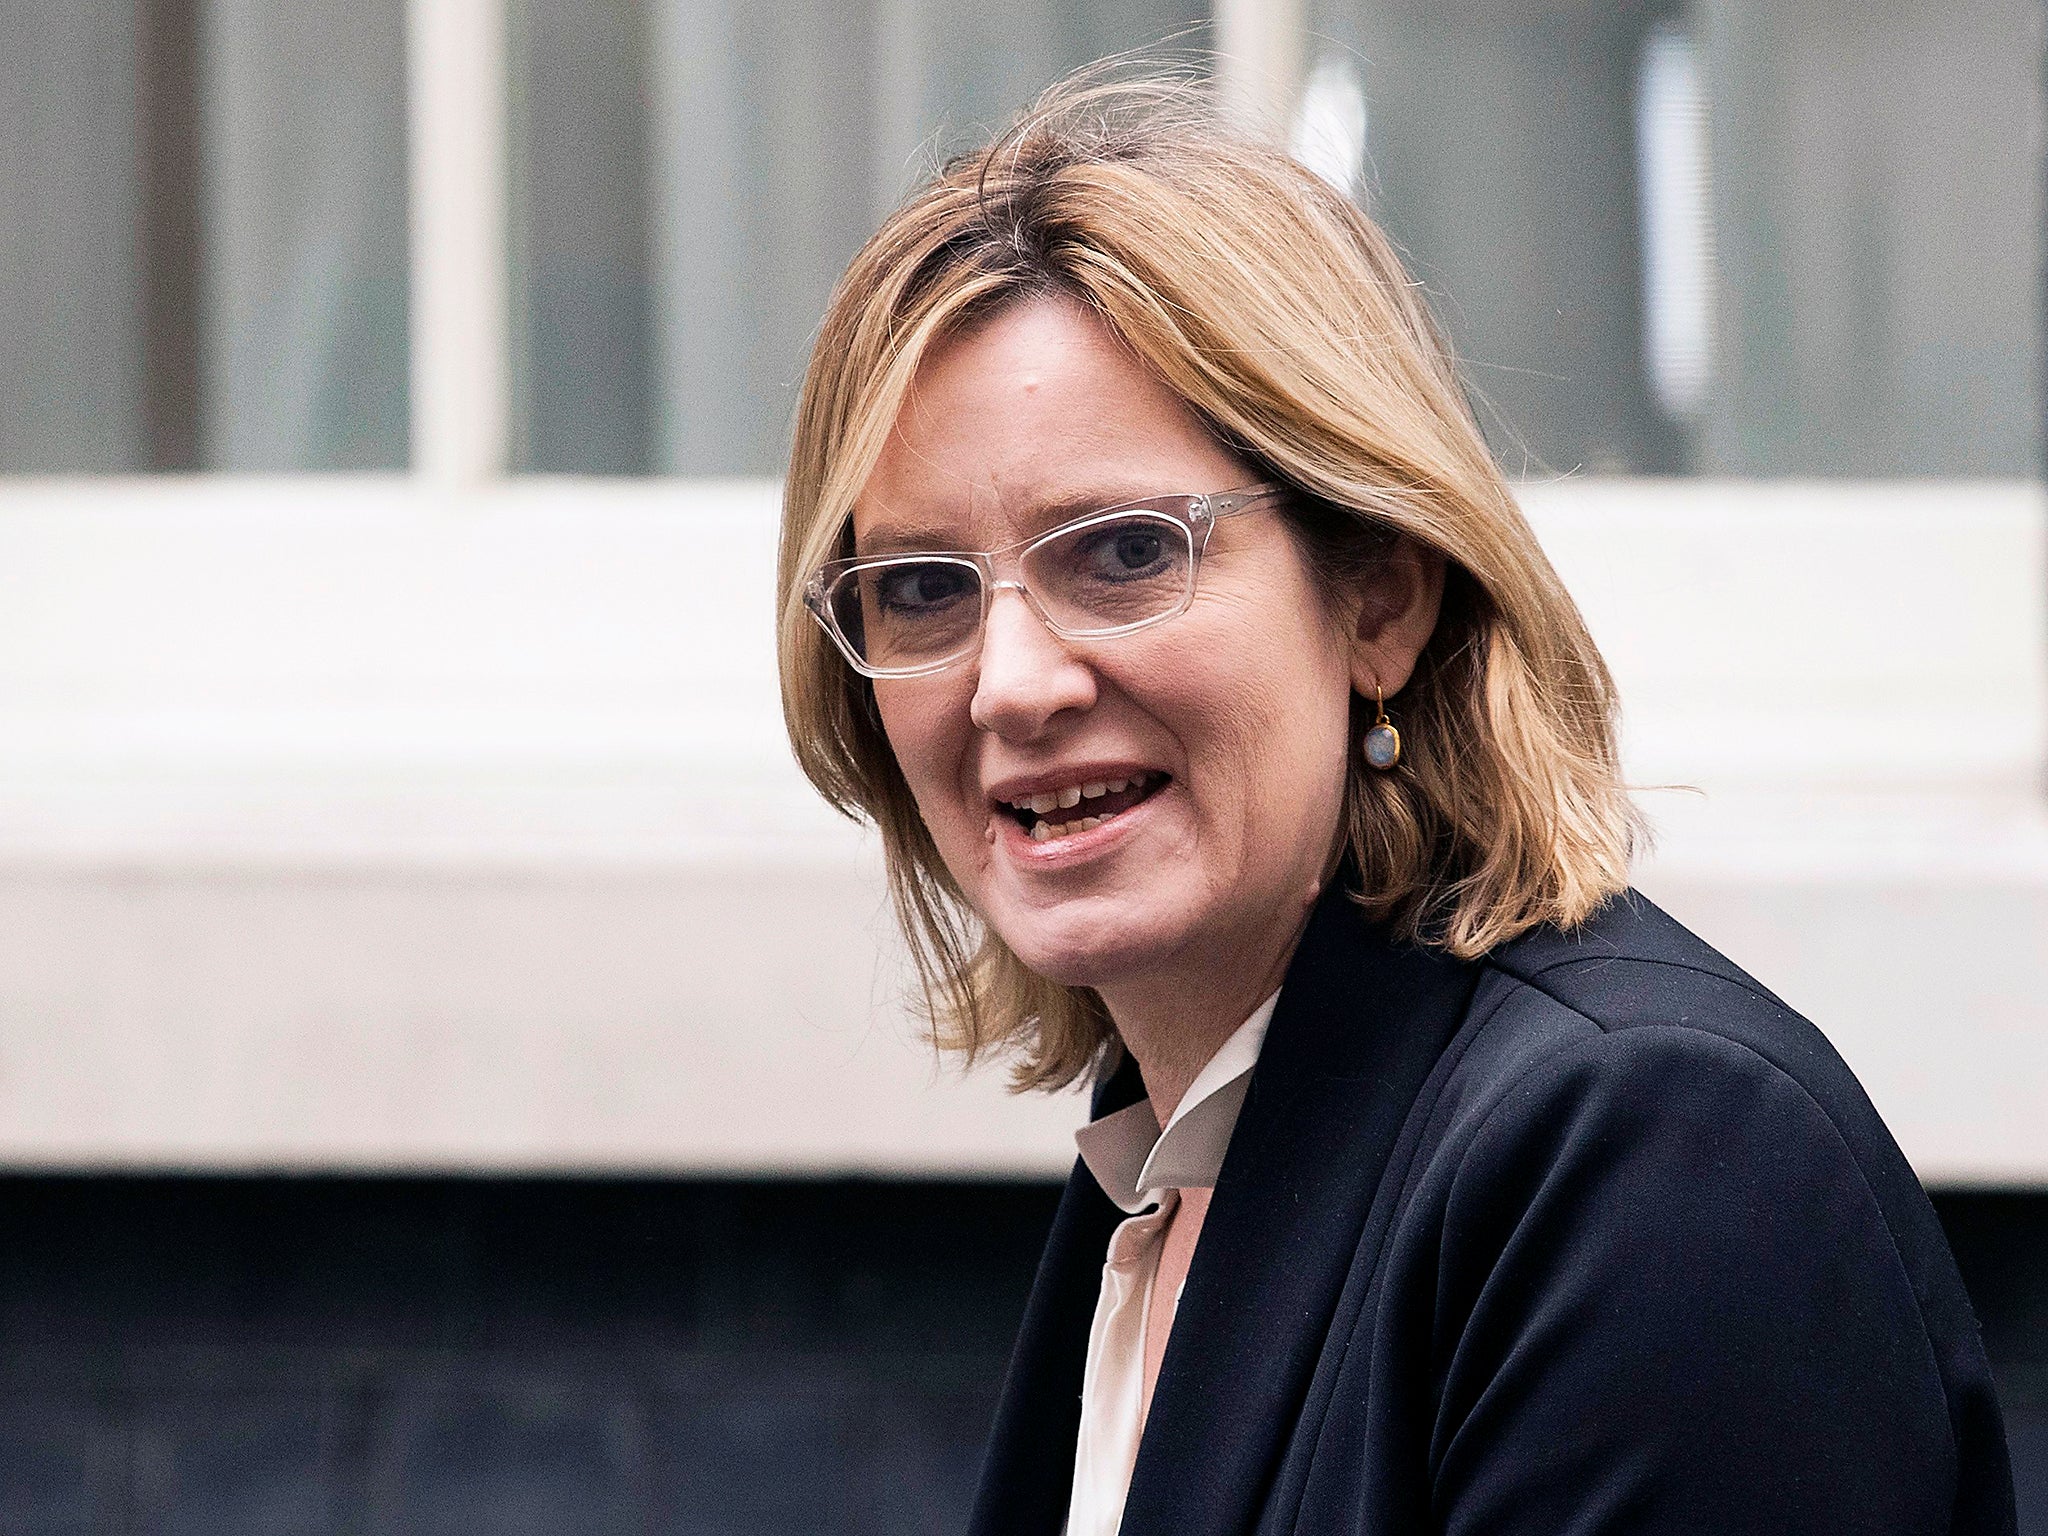 Amber Rudd hinted the net migration target would be dropped